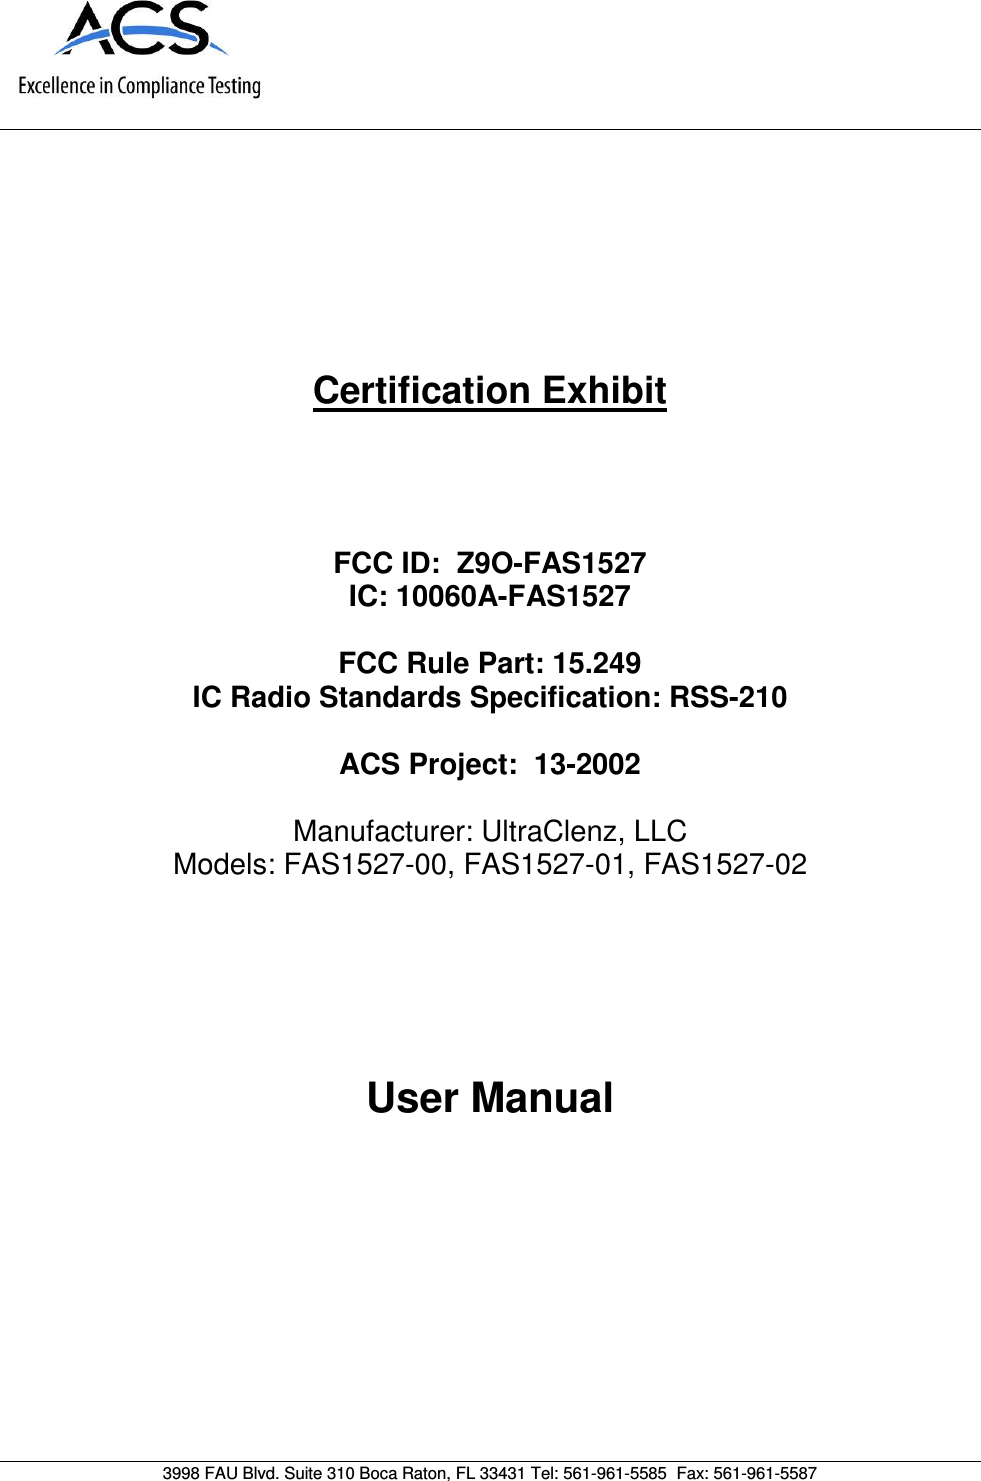      Certification Exhibit     FCC ID:  Z9O-FAS1527 IC: 10060A-FAS1527  FCC Rule Part: 15.249 IC Radio Standards Specification: RSS-210  ACS Project:  13-2002   Manufacturer: UltraClenz, LLC Models: FAS1527-00, FAS1527-01, FAS1527-02     User Manual   3998 FAU Blvd. Suite 310 Boca Raton, FL 33431 Tel: 561-961-5585  Fax: 561-961-5587 